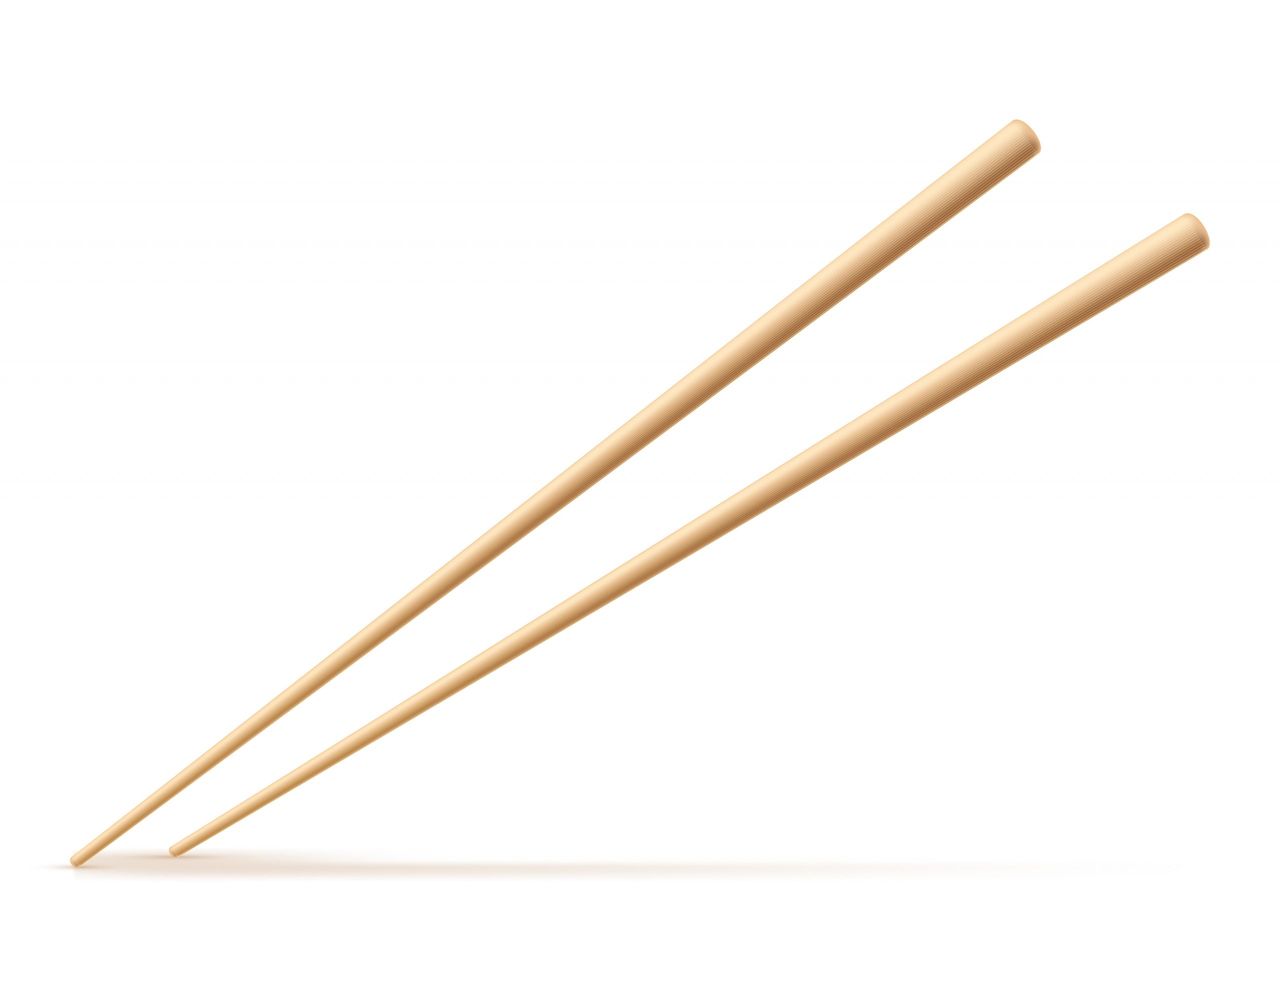 Wooden chopsticks isolated on white background. Vector illustration